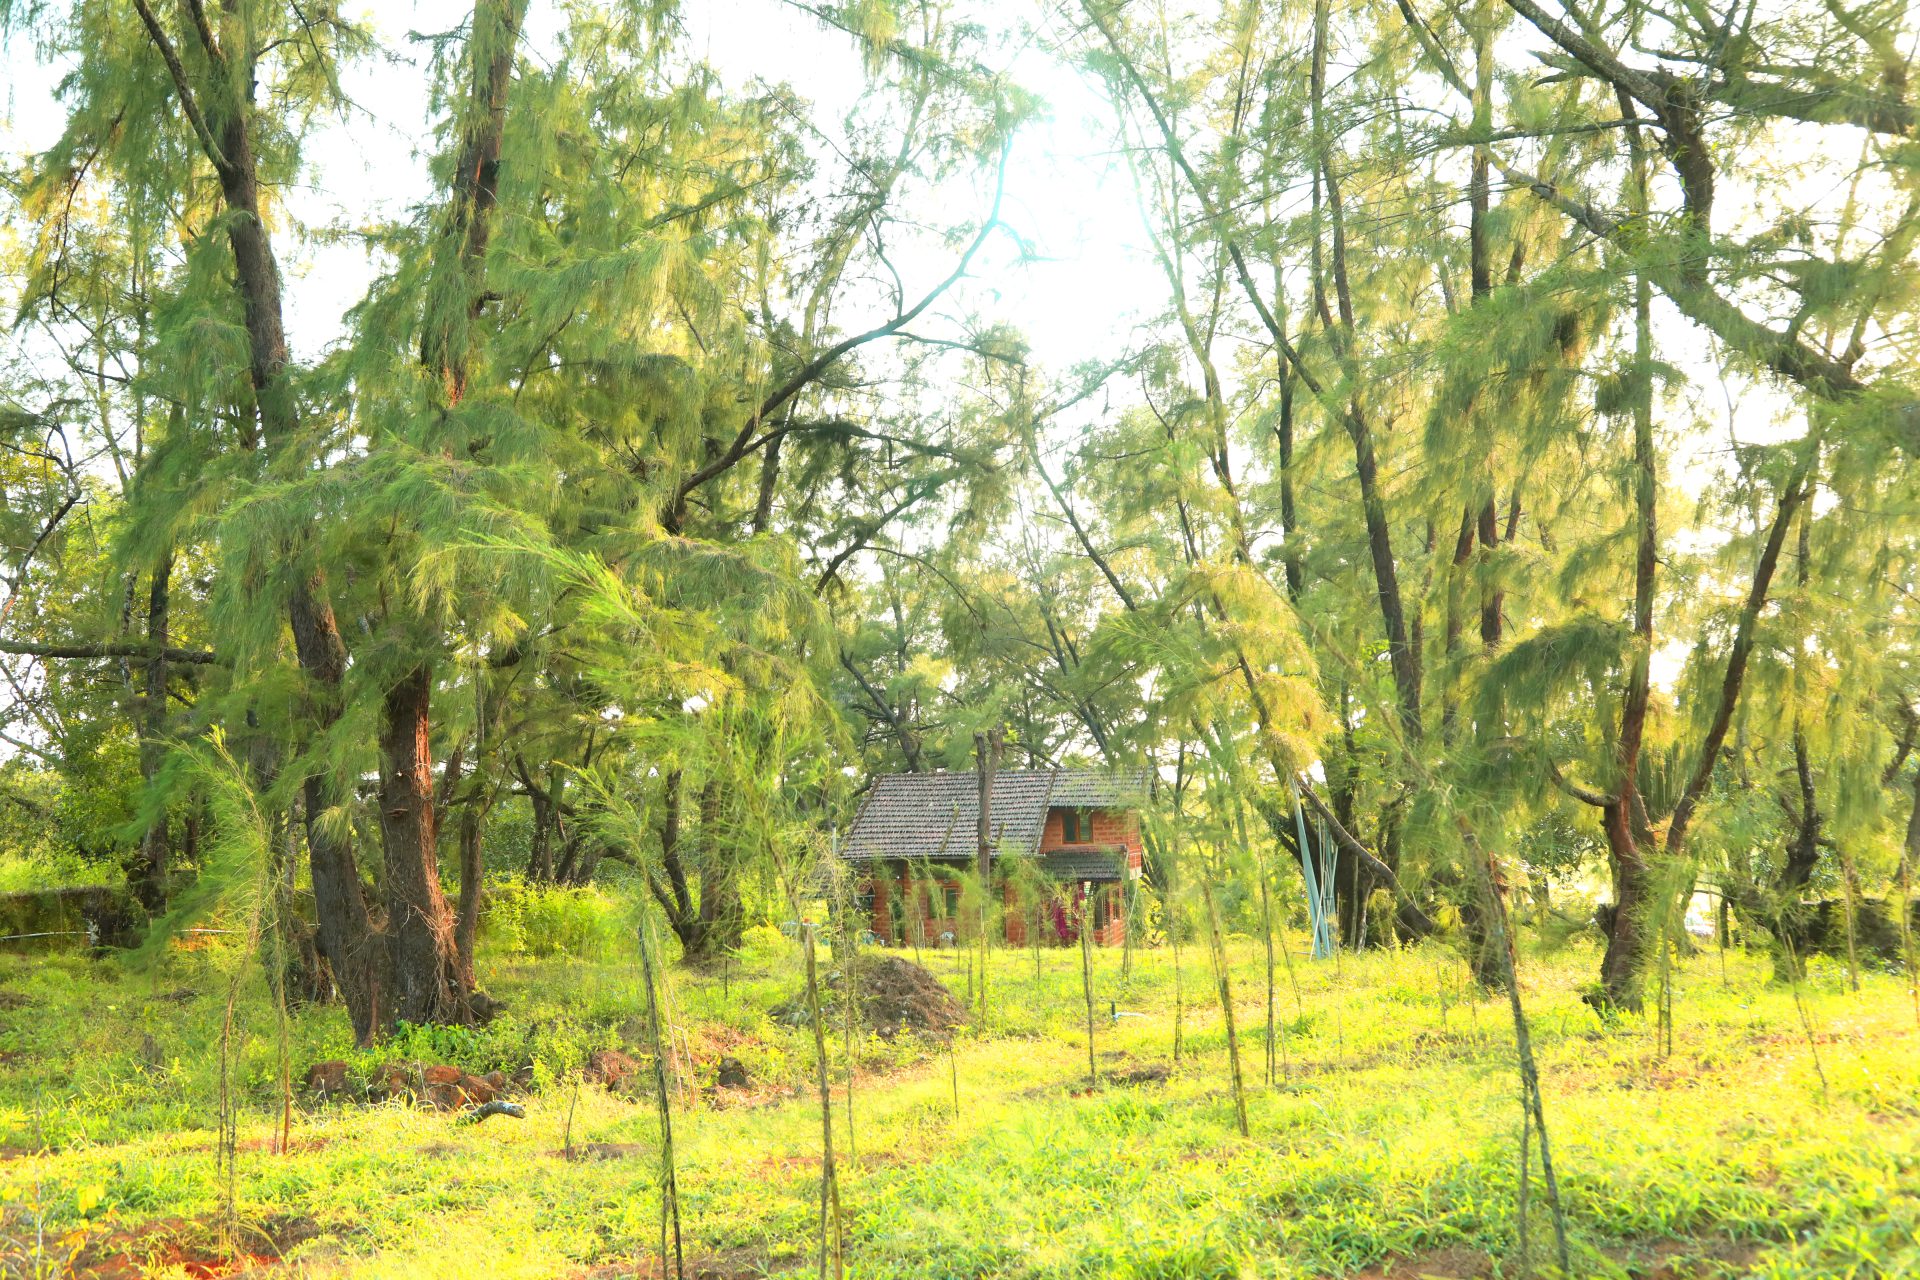 The villa is nestled in casuarina trees. View from the East.